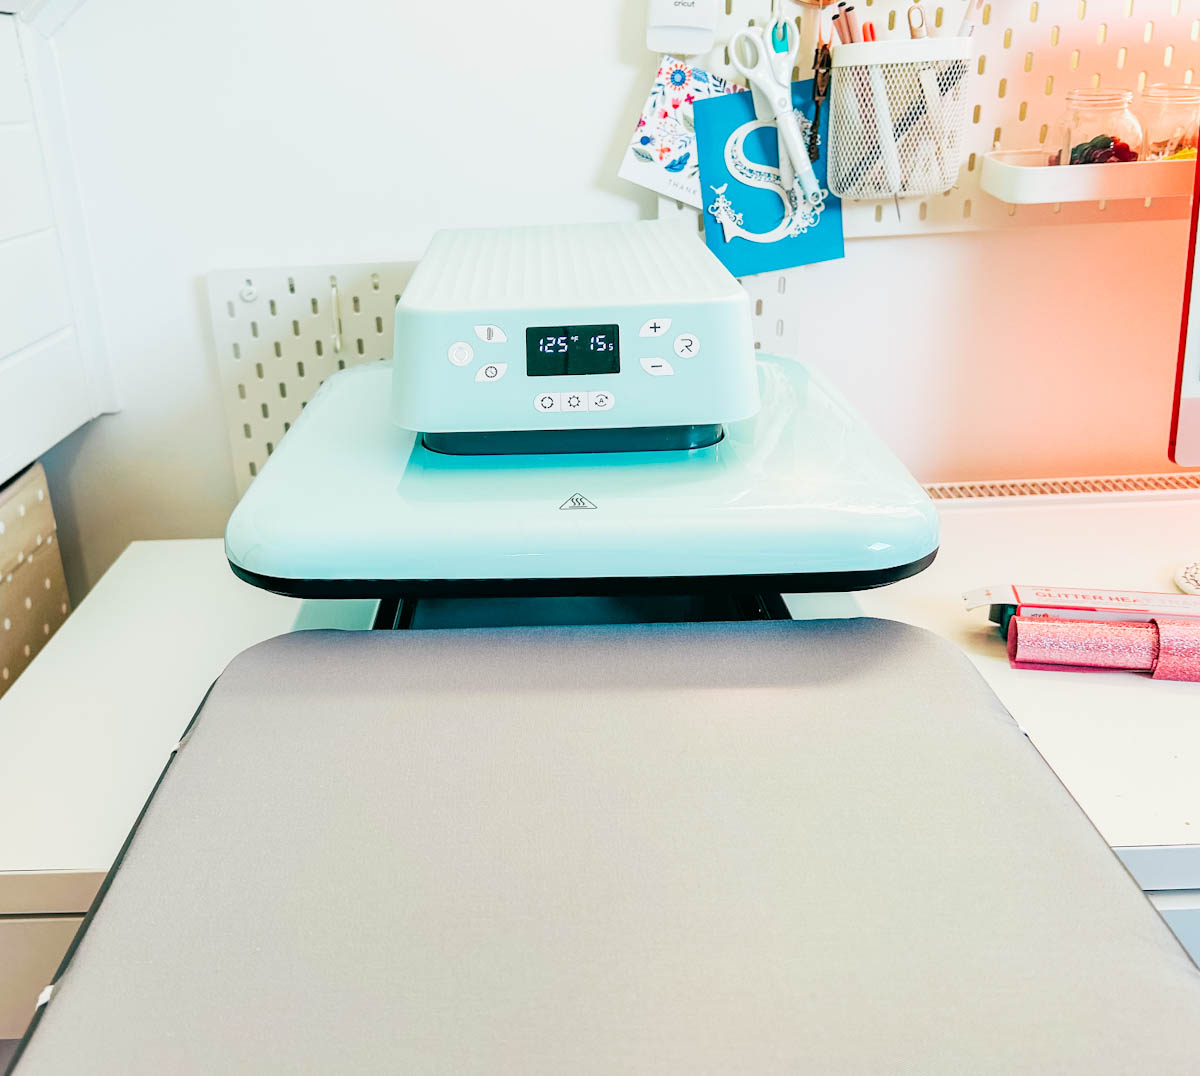 Review of the HTVRont Auto Heat Press